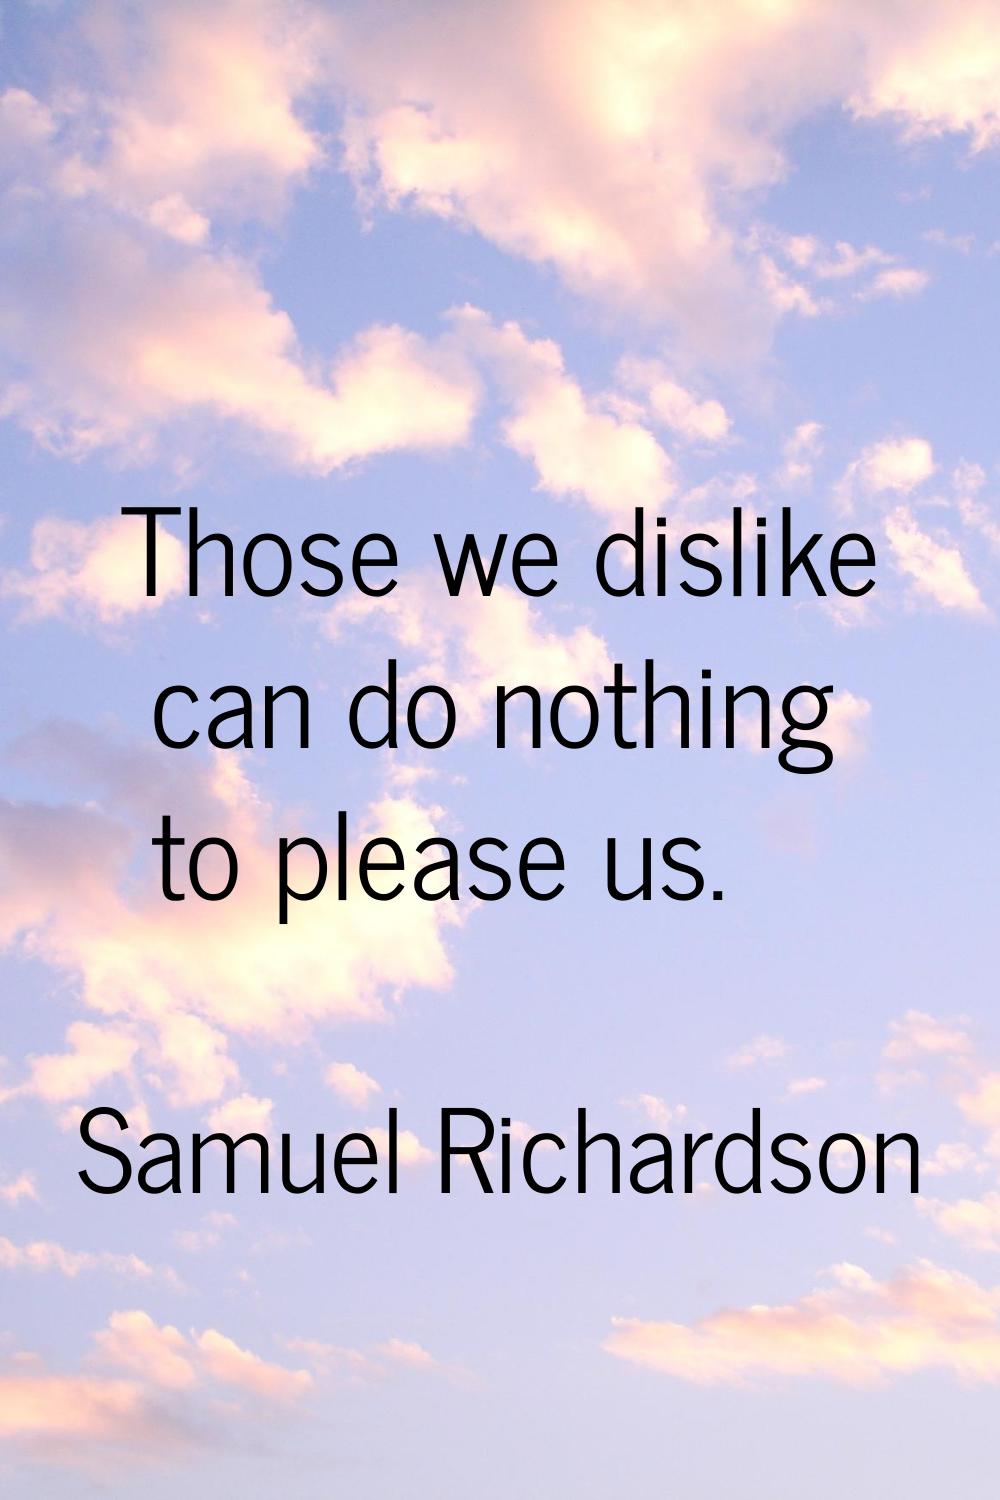 Those we dislike can do nothing to please us.